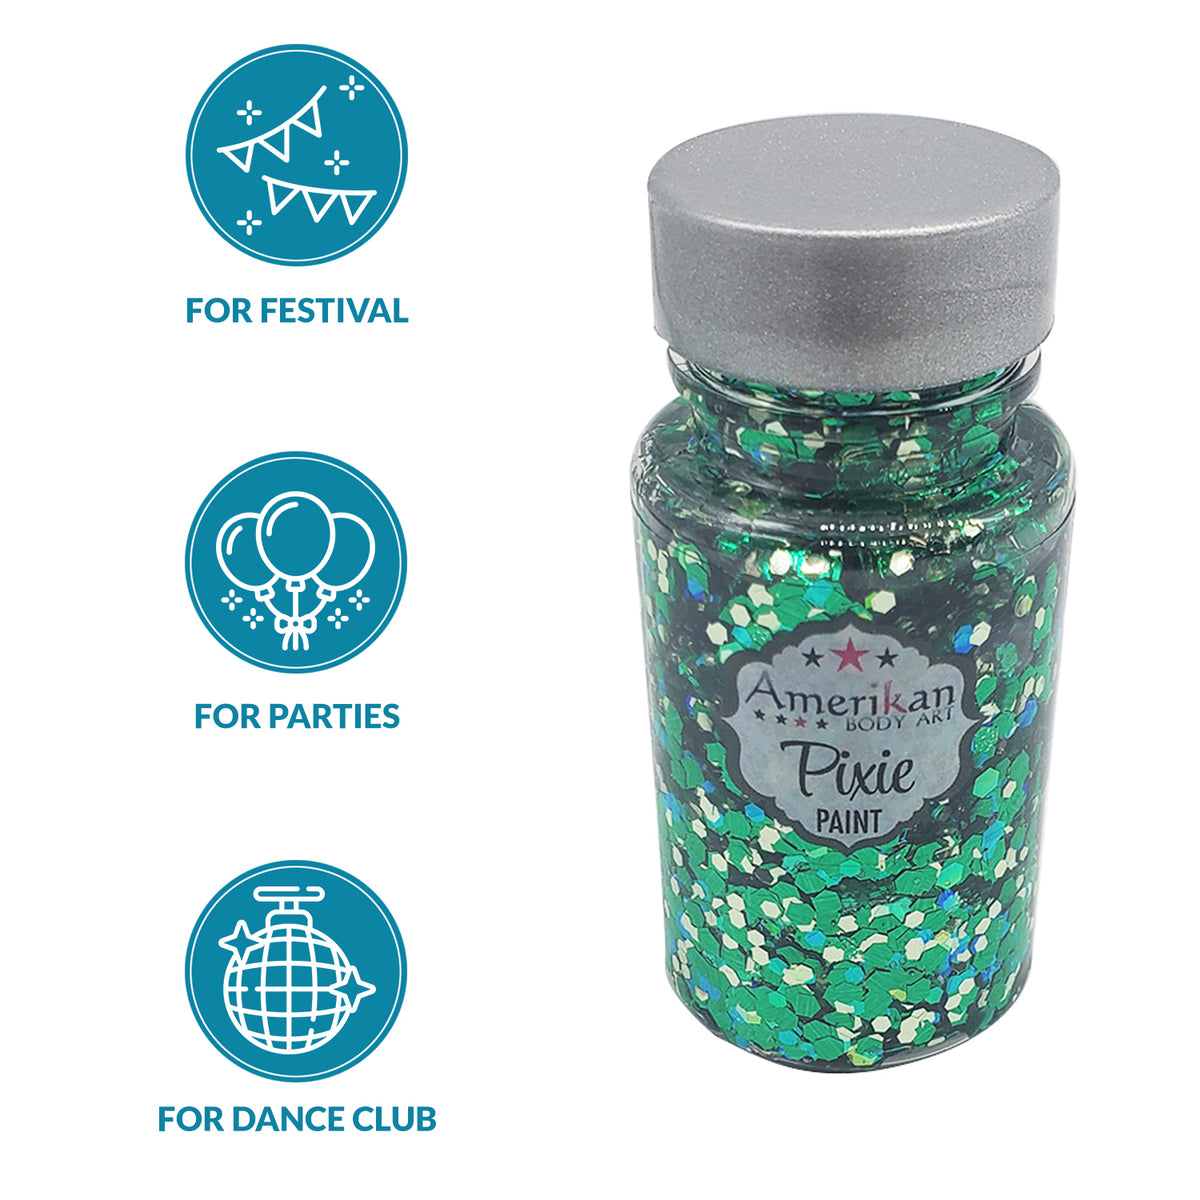 Pixie Paint Glitter Gel - Absinthe - Limited Edition Party Size 1.3 oz